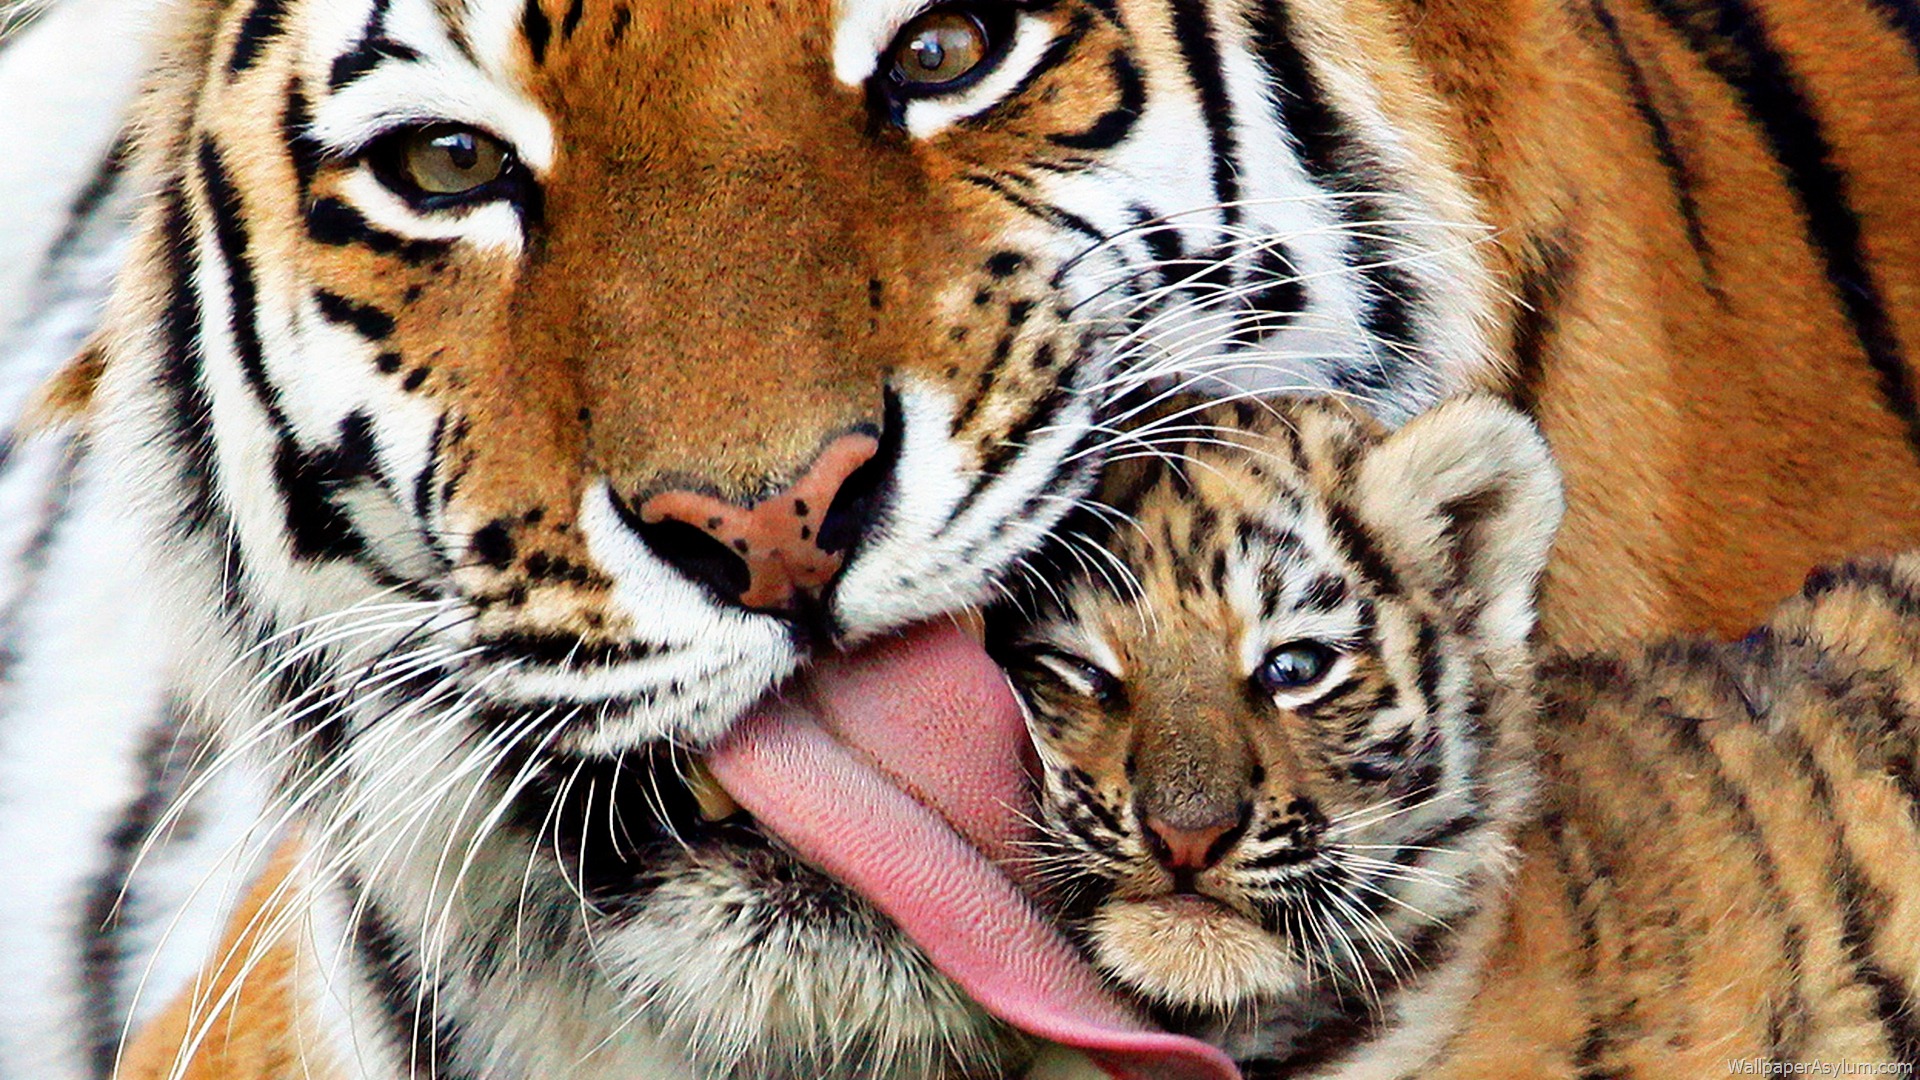 Tiger Mother Licking Her Cub...Tigers may be one of the most revered animals, but they are also vulnerable to extinction. As few as 3,200 exist in the wild today.